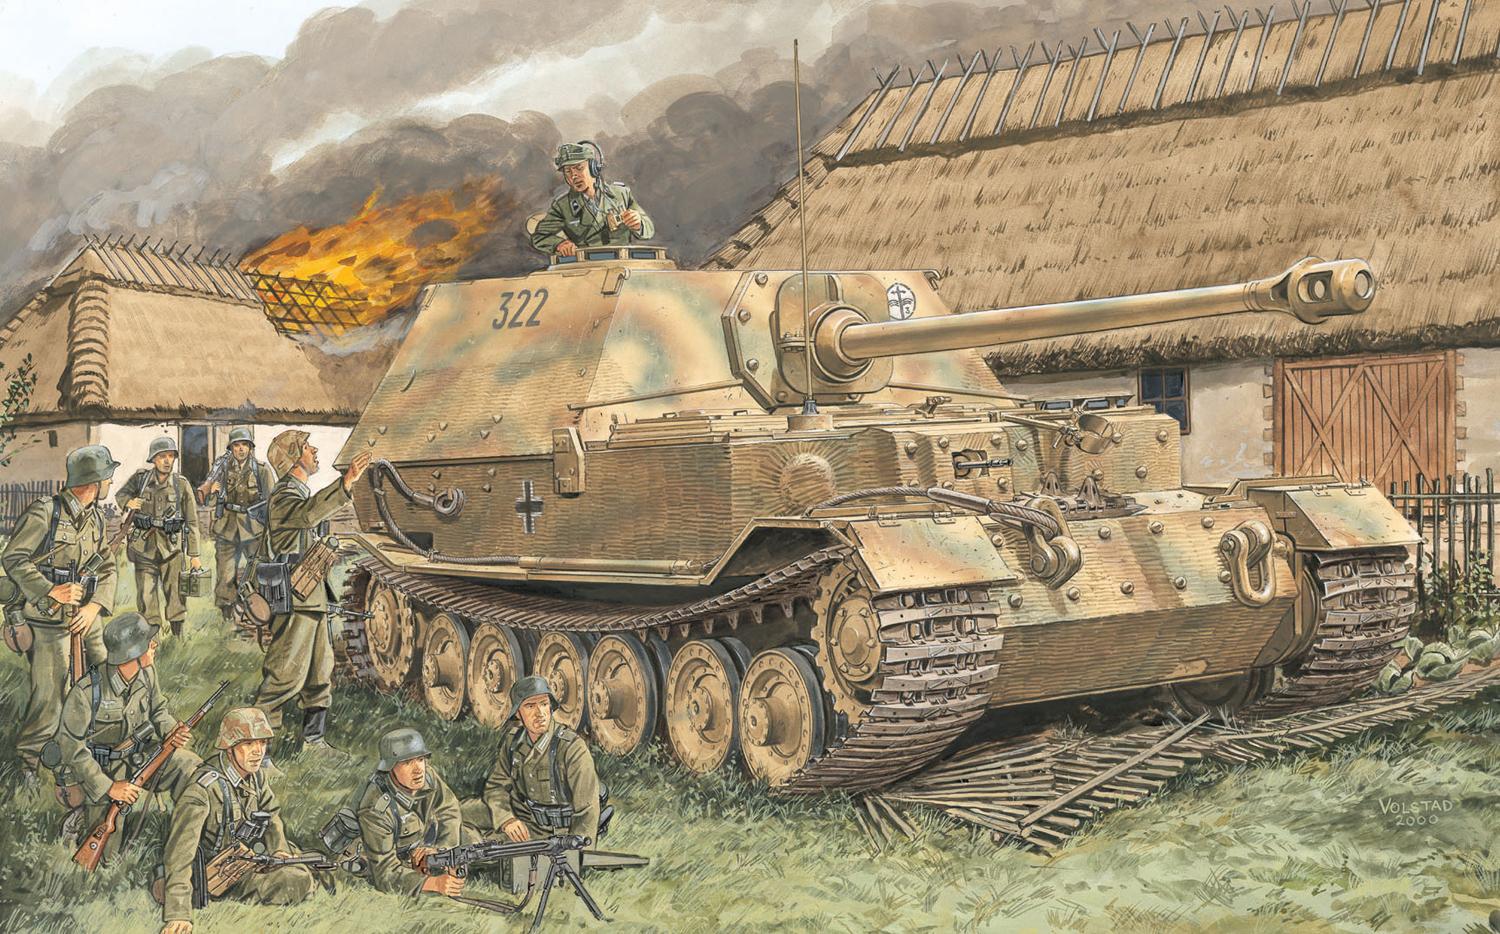 1/35 WW.II ドイツ軍 Sd.Kfz.184エレファント 重駆逐戦車(2in1キット)